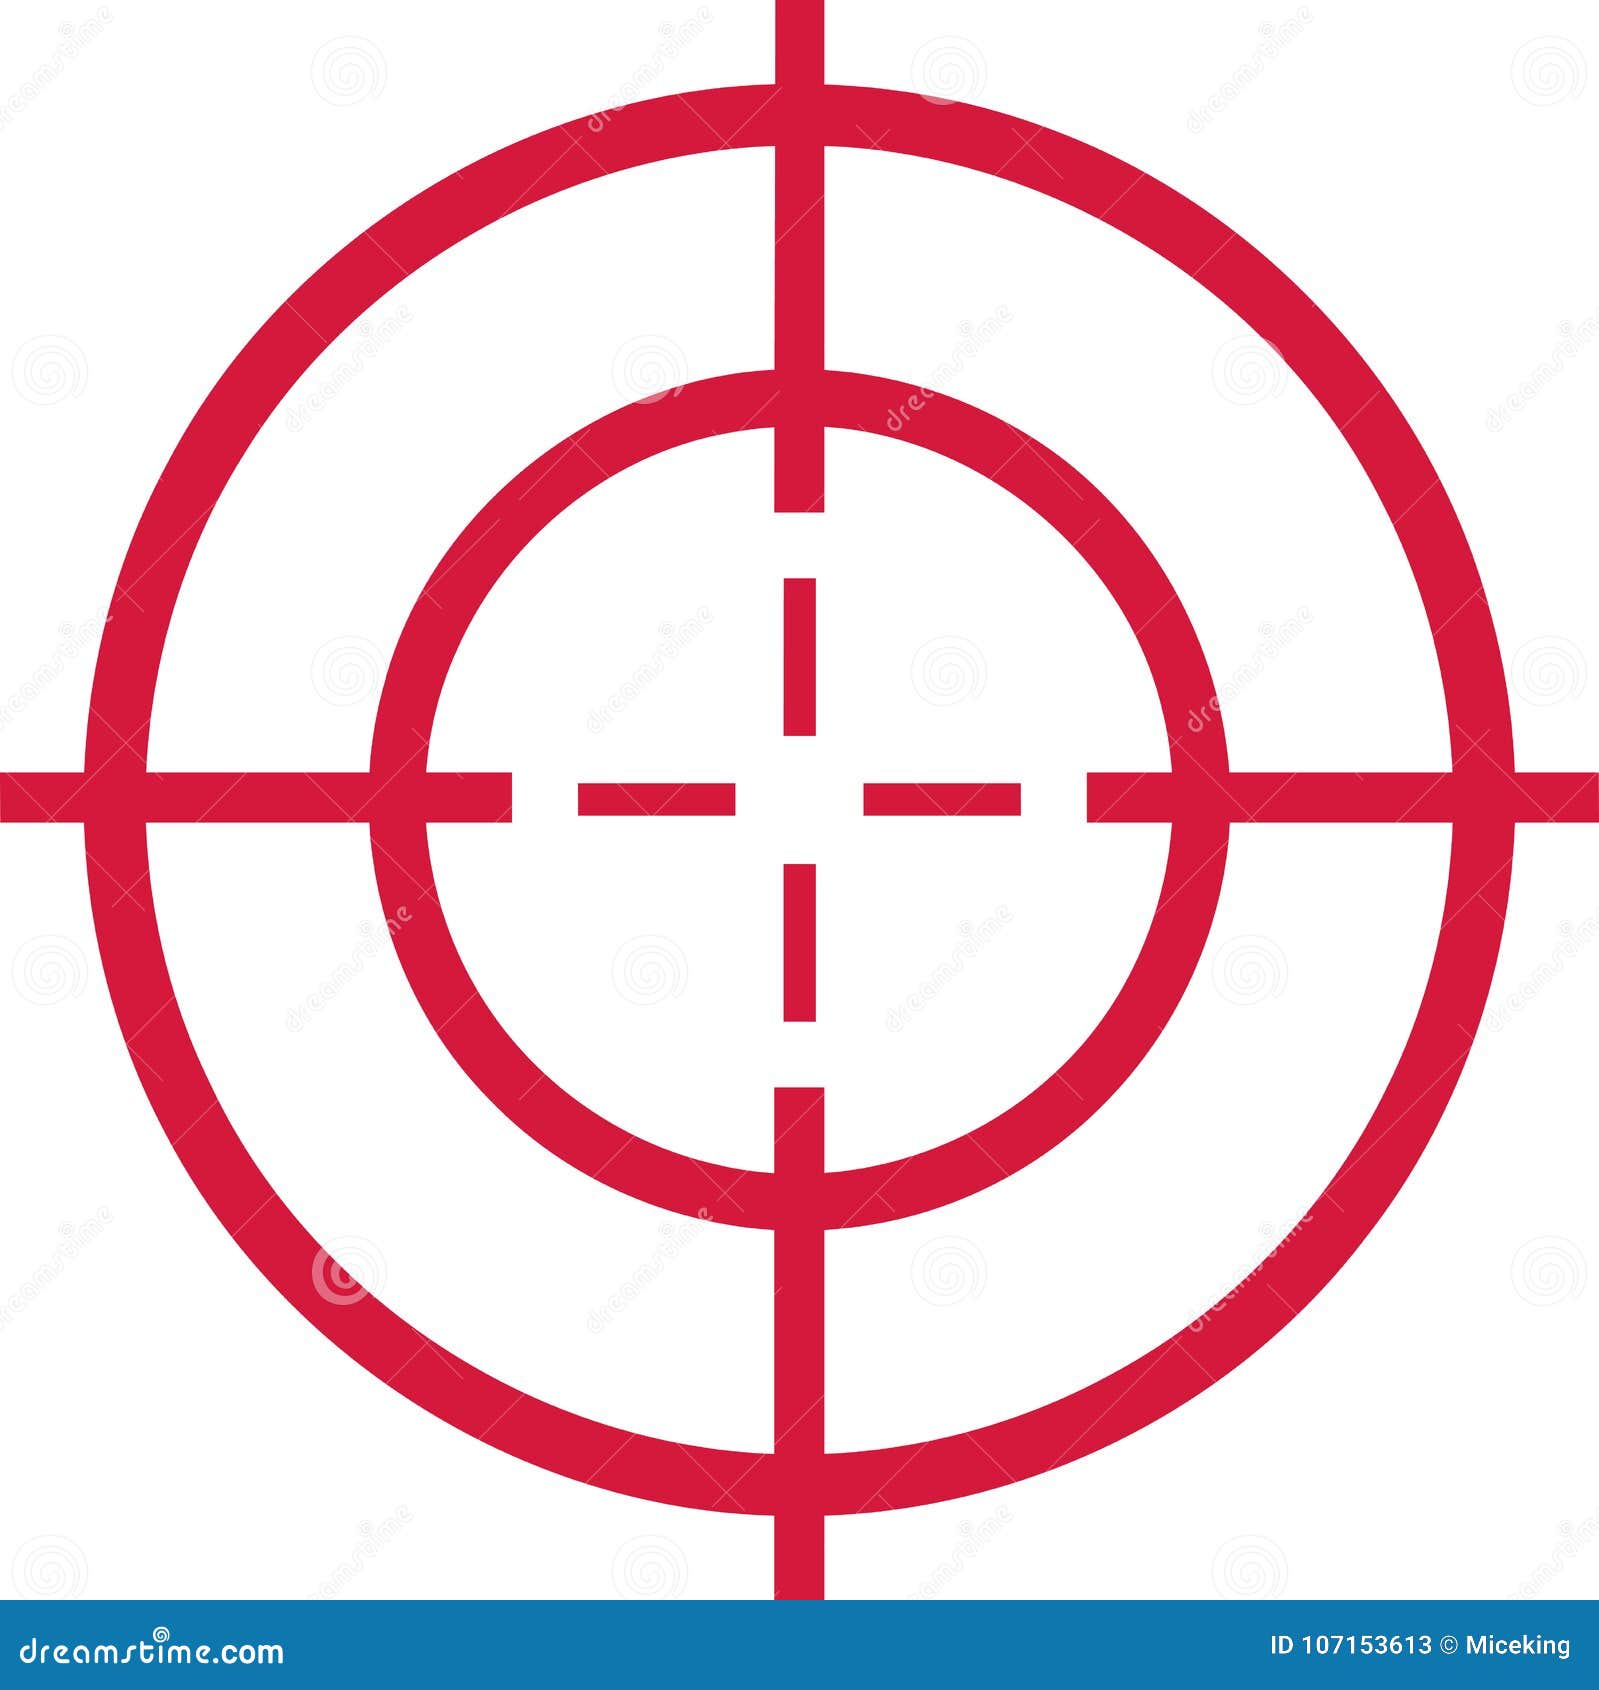 Crosshair, Reticle, Target Mark Icon, Symbol And Logo. Accuracy